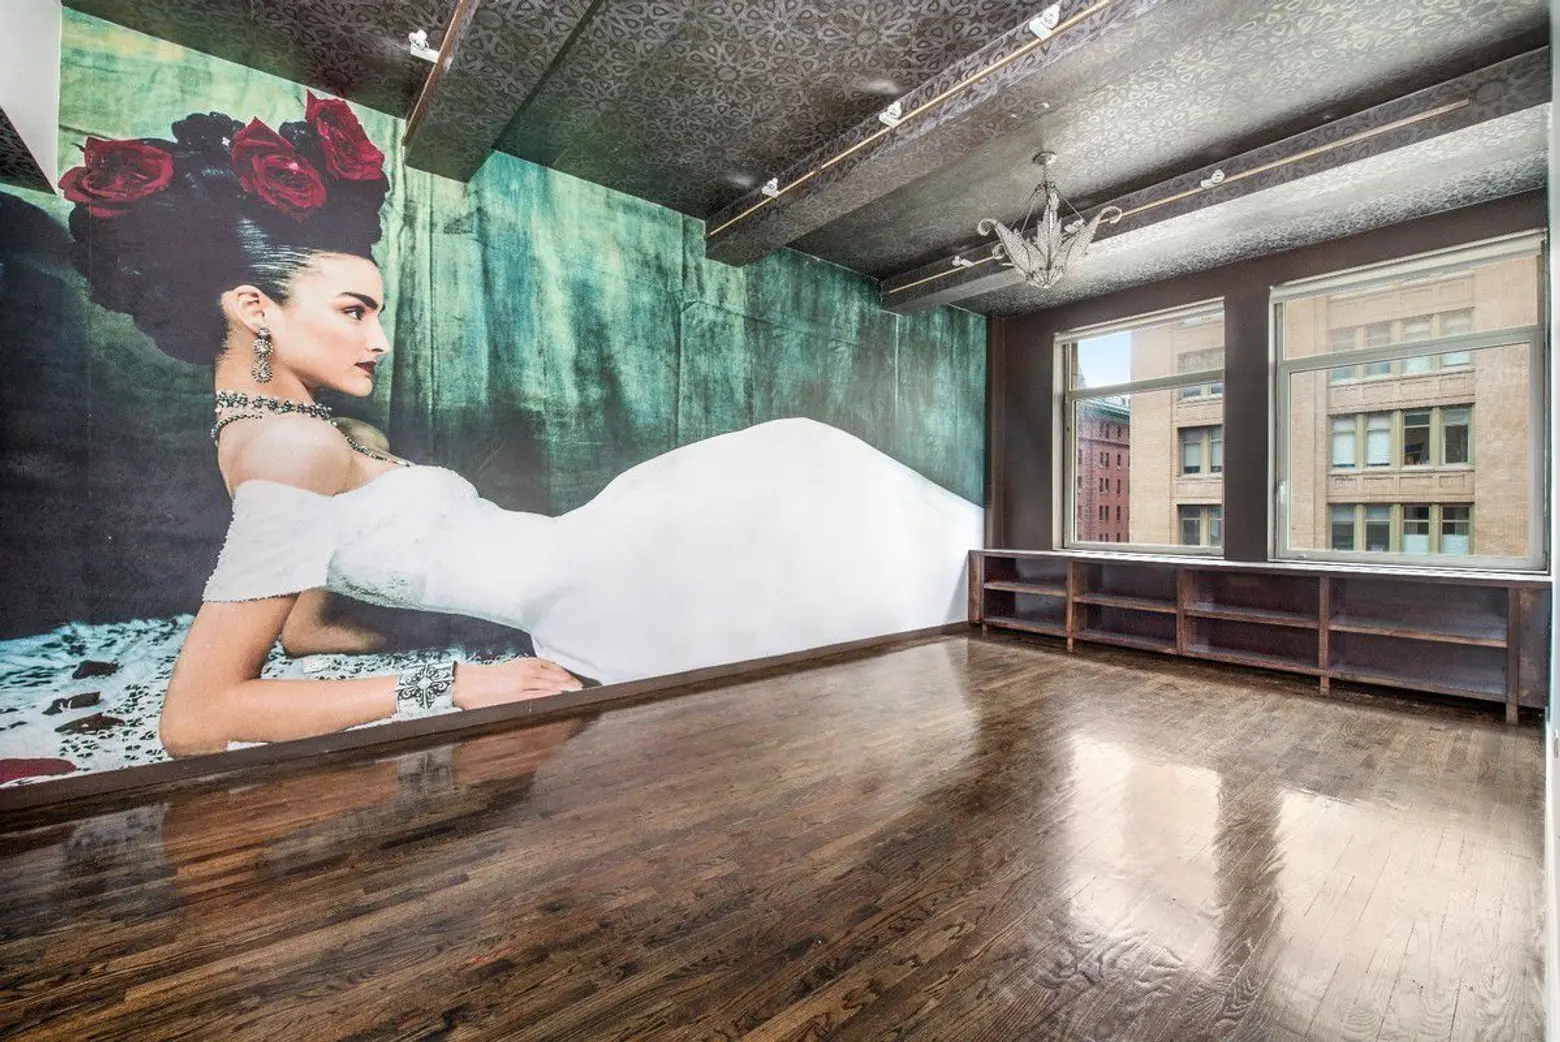 Fashion designer Reem Acra lists Chelsea condo combo with dramatic art for $5.5M